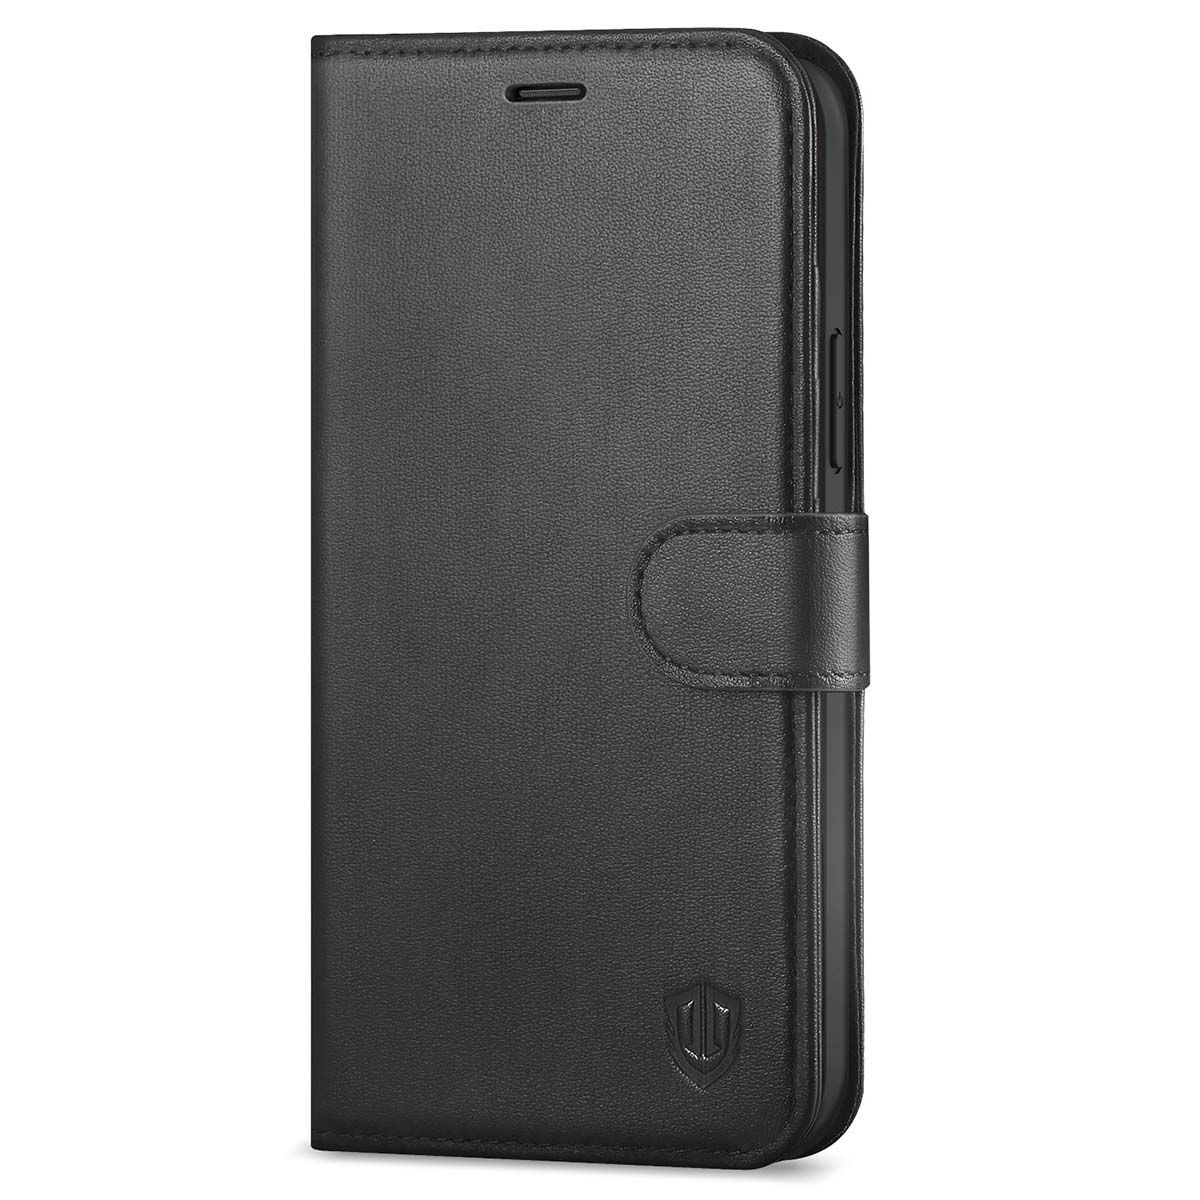 SHIELDON iPhone 12 Wallet Case, iPhone 12 Pro Wallet Cover, Leather, RFID Blocking, Folio, Closure